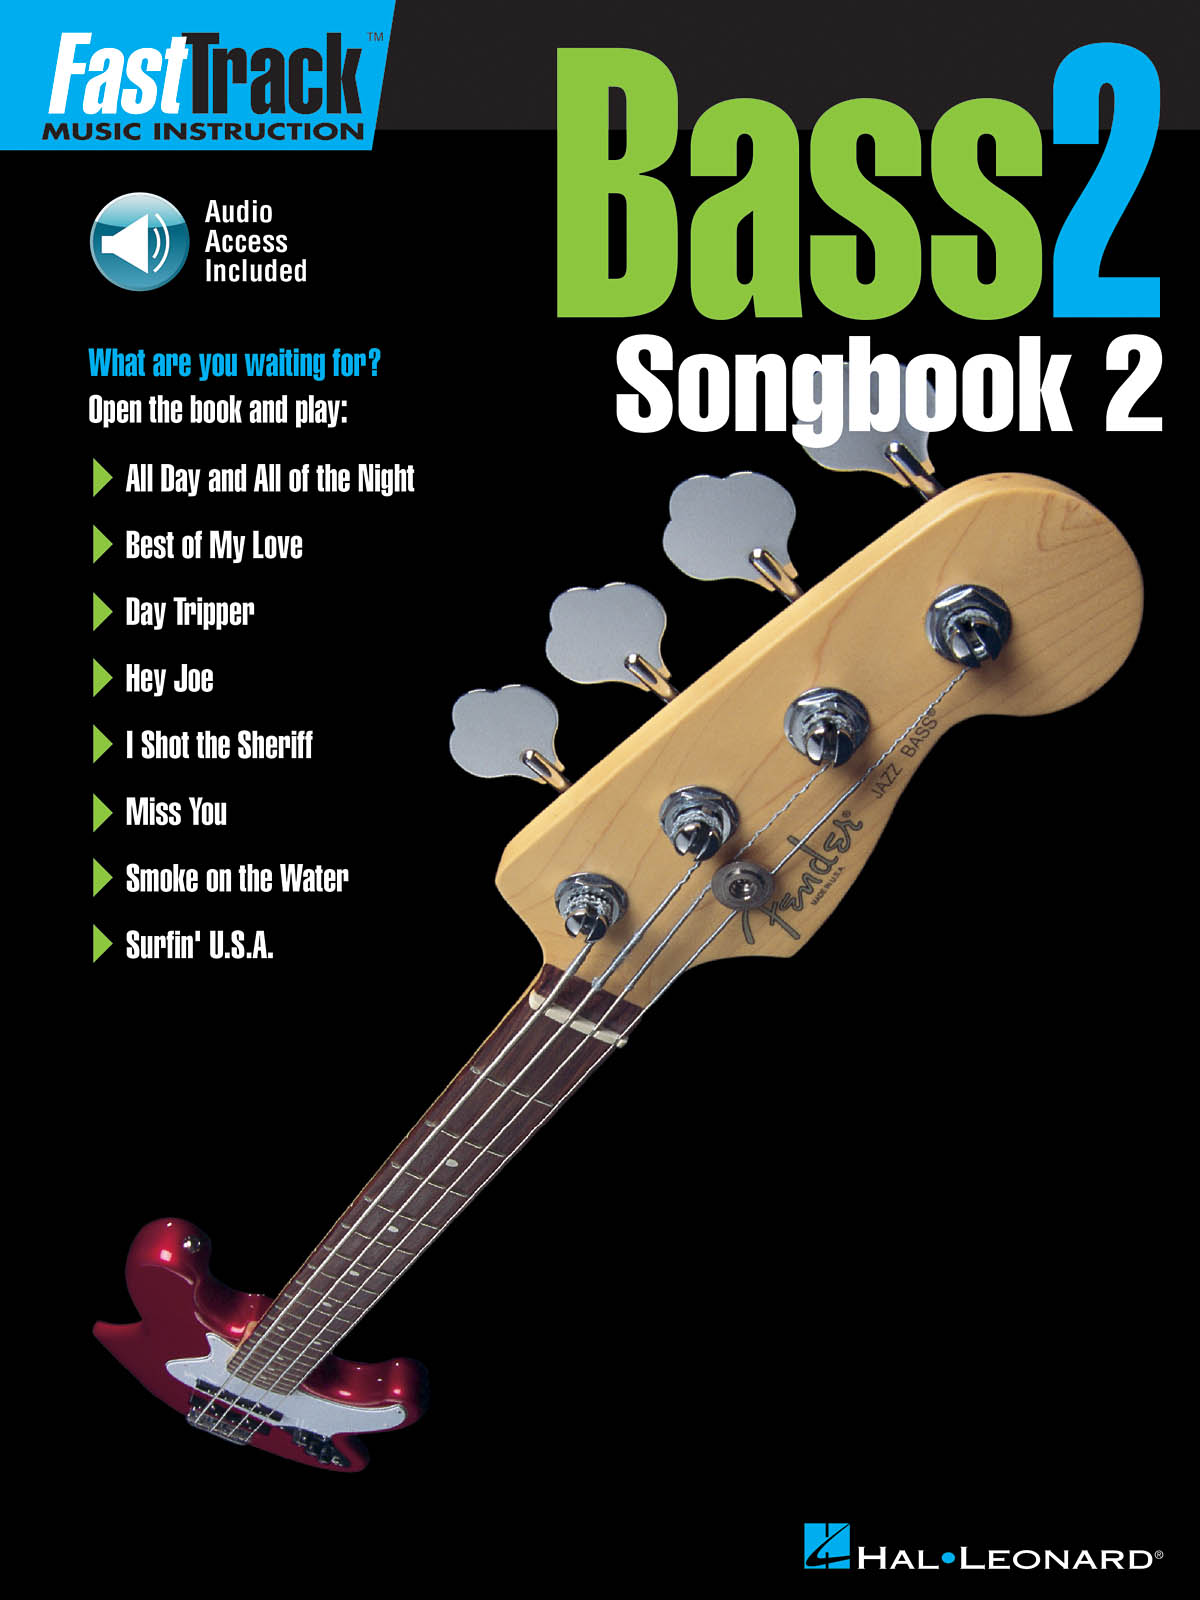 FastTrack - Bass 2 - Songbook 2: Bass Guitar Solo: Mixed Songbook